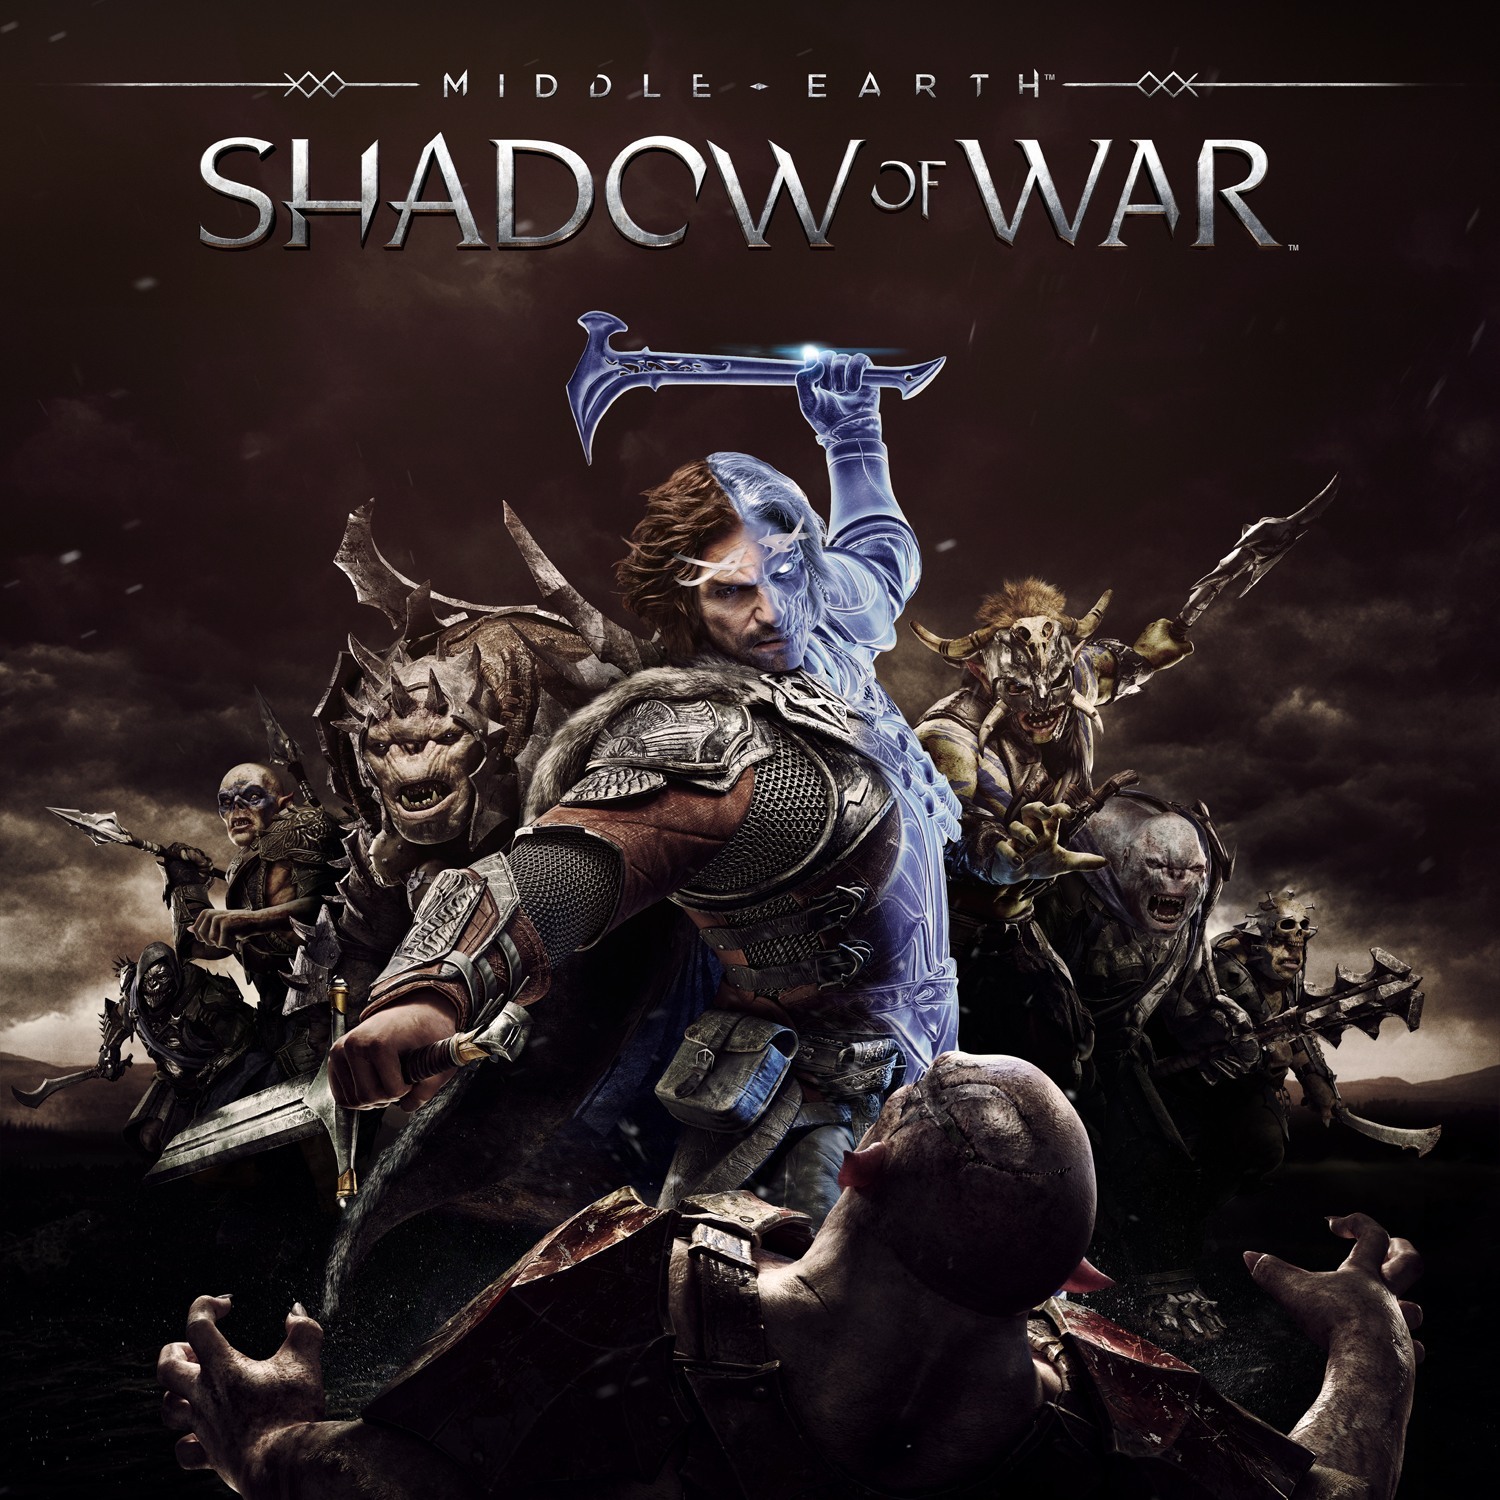 The sequel to the critically acclaimed Middle-earth: Shadow of Mordor, Middle-earth: Shadow of War features an original story with the return of Talion and Celebrimbor, who must go behind enemy lines to forge an army and turn all of Mordor against the Dark Lord, Sauron. Set between the events of The Hobbit and The Lord of the Rings, Middle-earth: Shadow of War offers a richer, more personal and expansive world full of epic heroes and villains, iconic locations, original enemy types, even more personalities and a new cast of characters with untold stories.  <p> In Middle-earth: Shadow of War, players wield a new Ring of Power and confront the deadliest of enemies, including Sauron and his Nazgul, in a monumental battle for Middle-earth. The open-world action-adventure game is brought to life through the expansion of the award-winning Nemesis System. This robust personalization from the first game is now applied to the entire world where the environments and characters are all shaped by player actions and decisions, creating a personal world unique to every gameplay experience. Shadow of War expands on the Nemesis System with the introduction of Followers who bring about entirely new stories of loyalty, betrayal and revenge. The Nemesis System is also expanded to create a unique personal world through Nemesis Fortresses, which allows players to utilize different strategies to conquer dynamic strongholds and create personalized worlds with their unique Orc army.